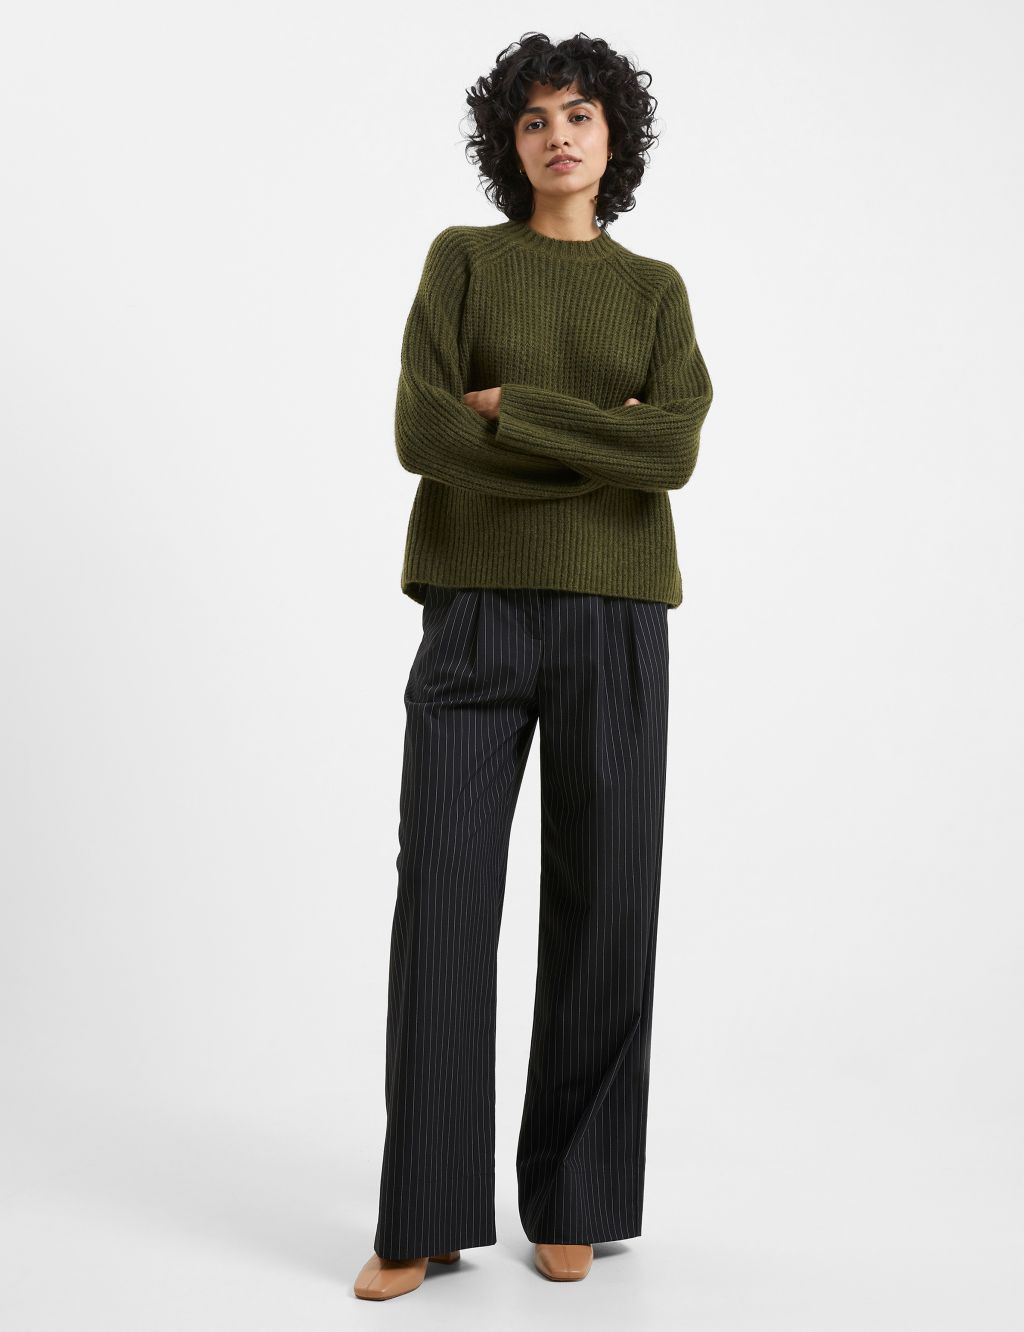 Page 3 - Women’s Crew-Neck Jumpers | M&S